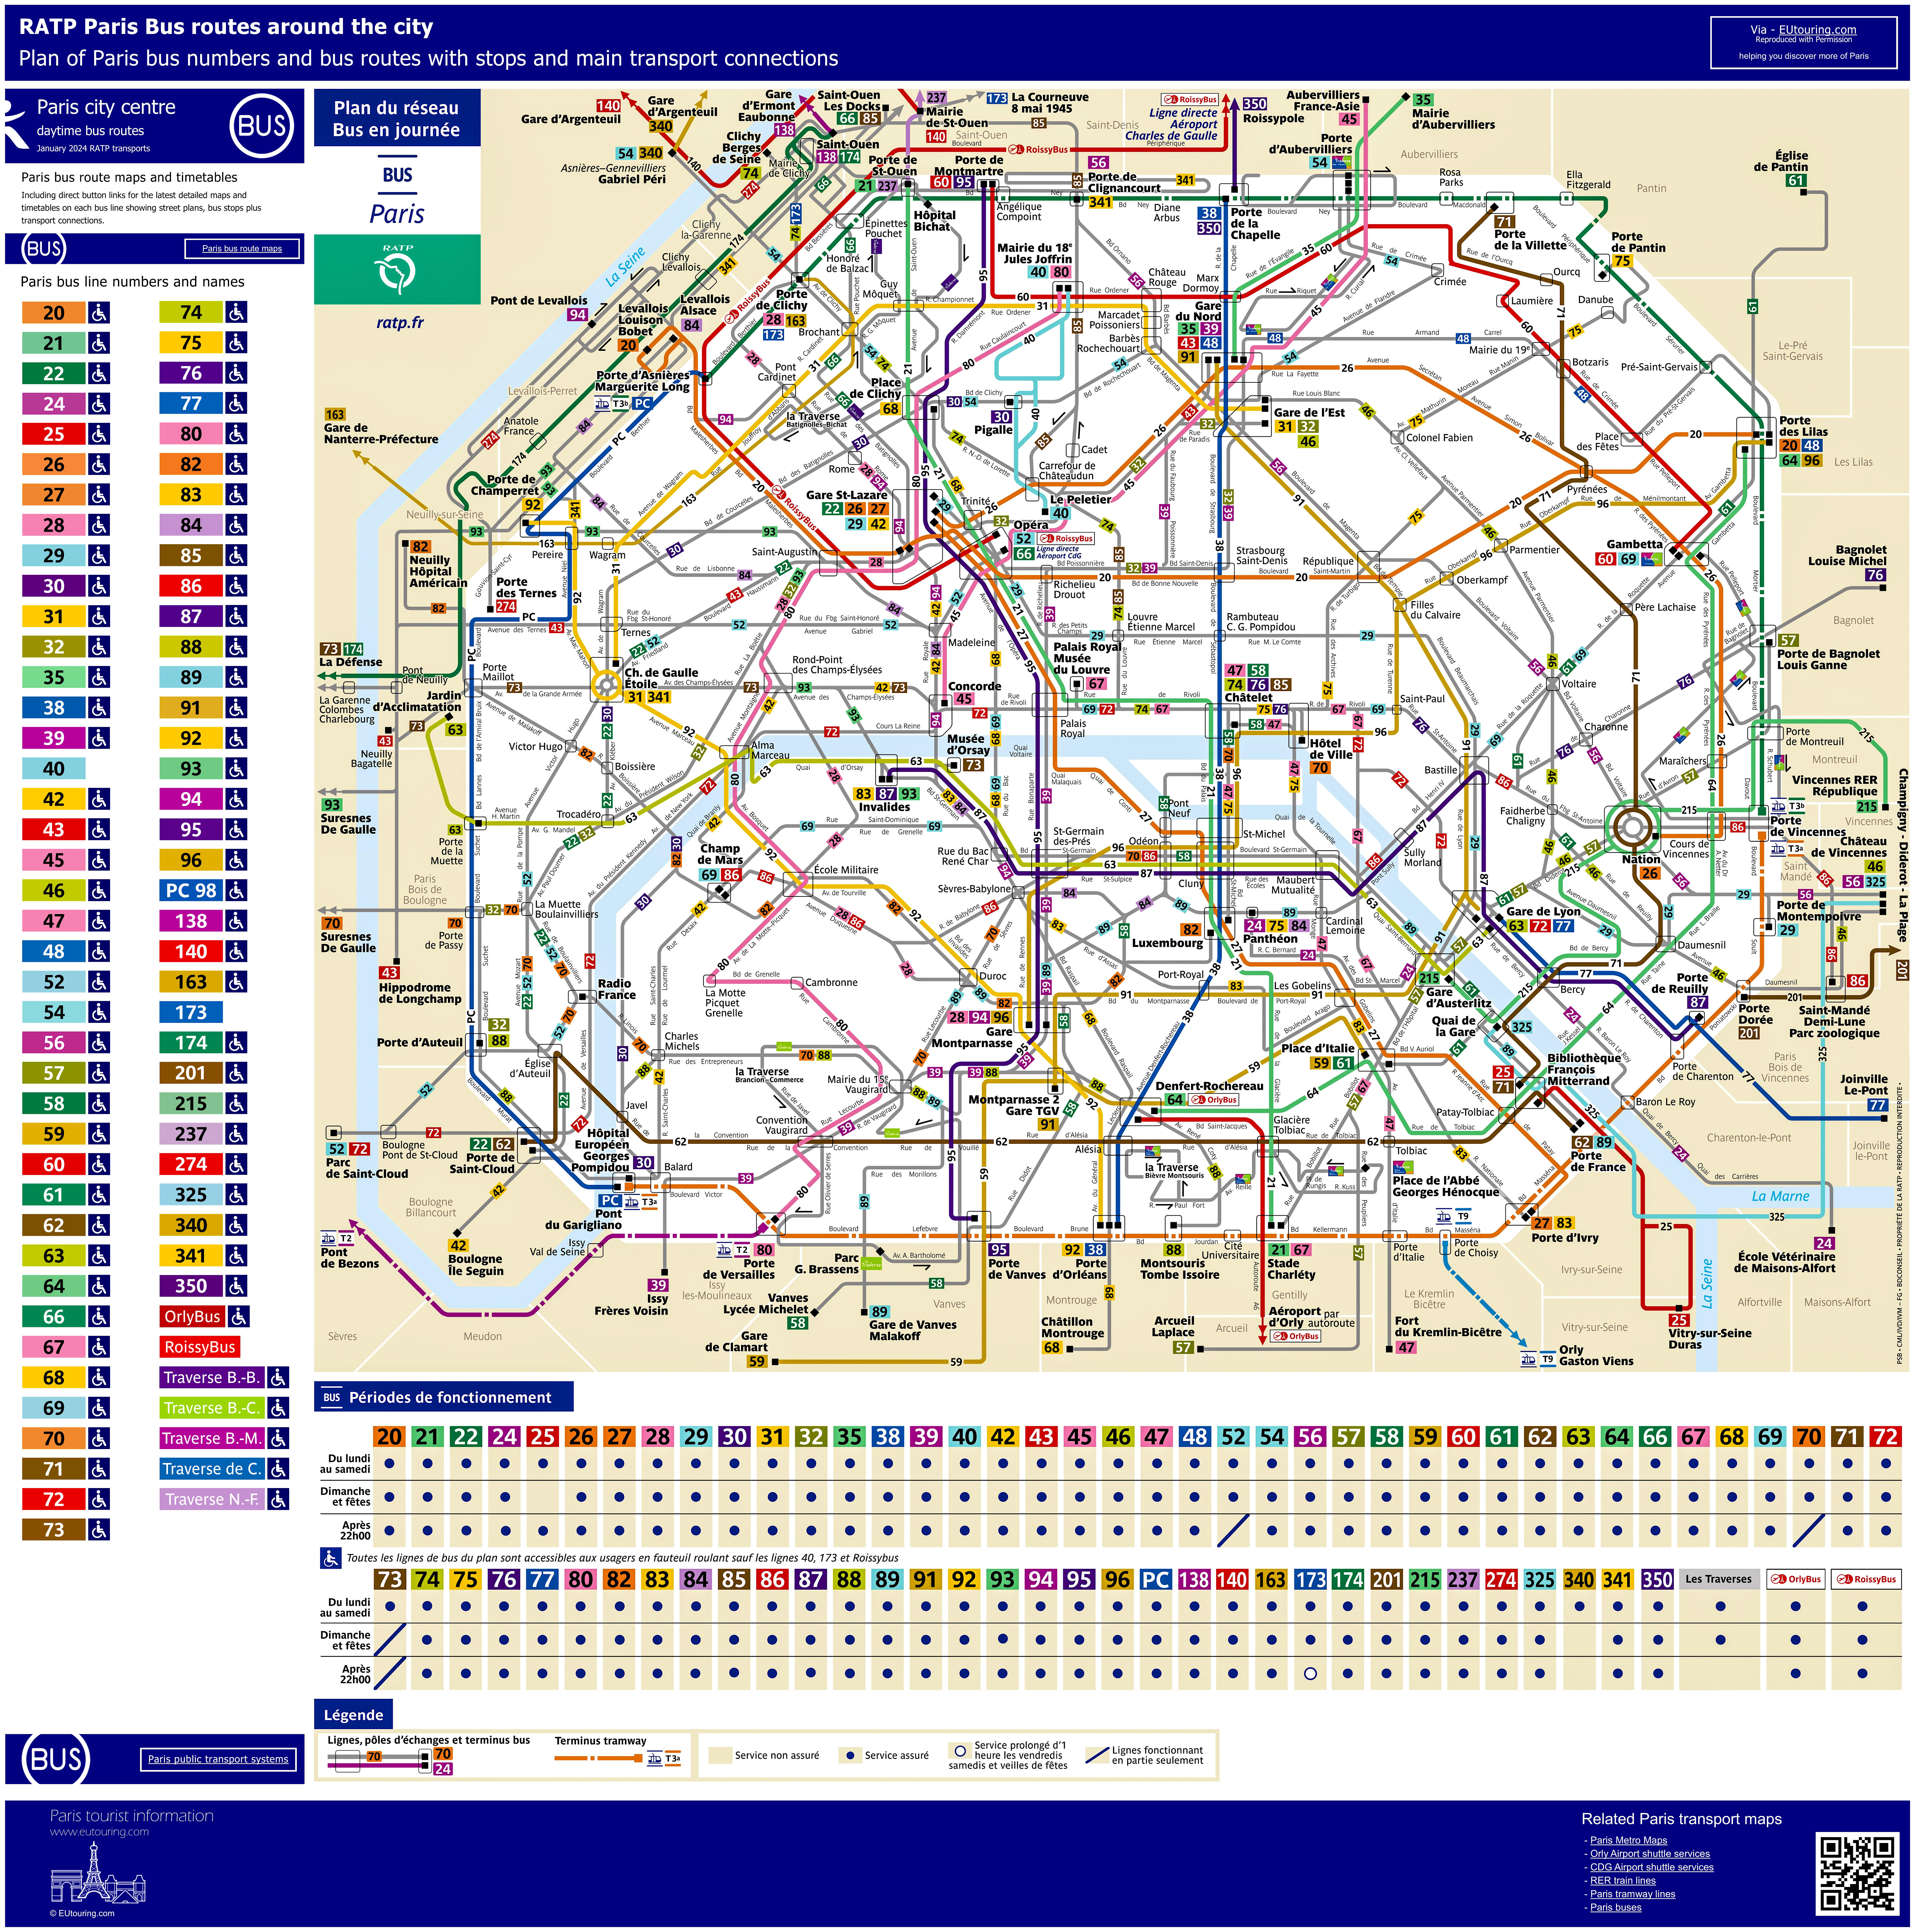 paris bus route maps with city street plan in pdf or image file